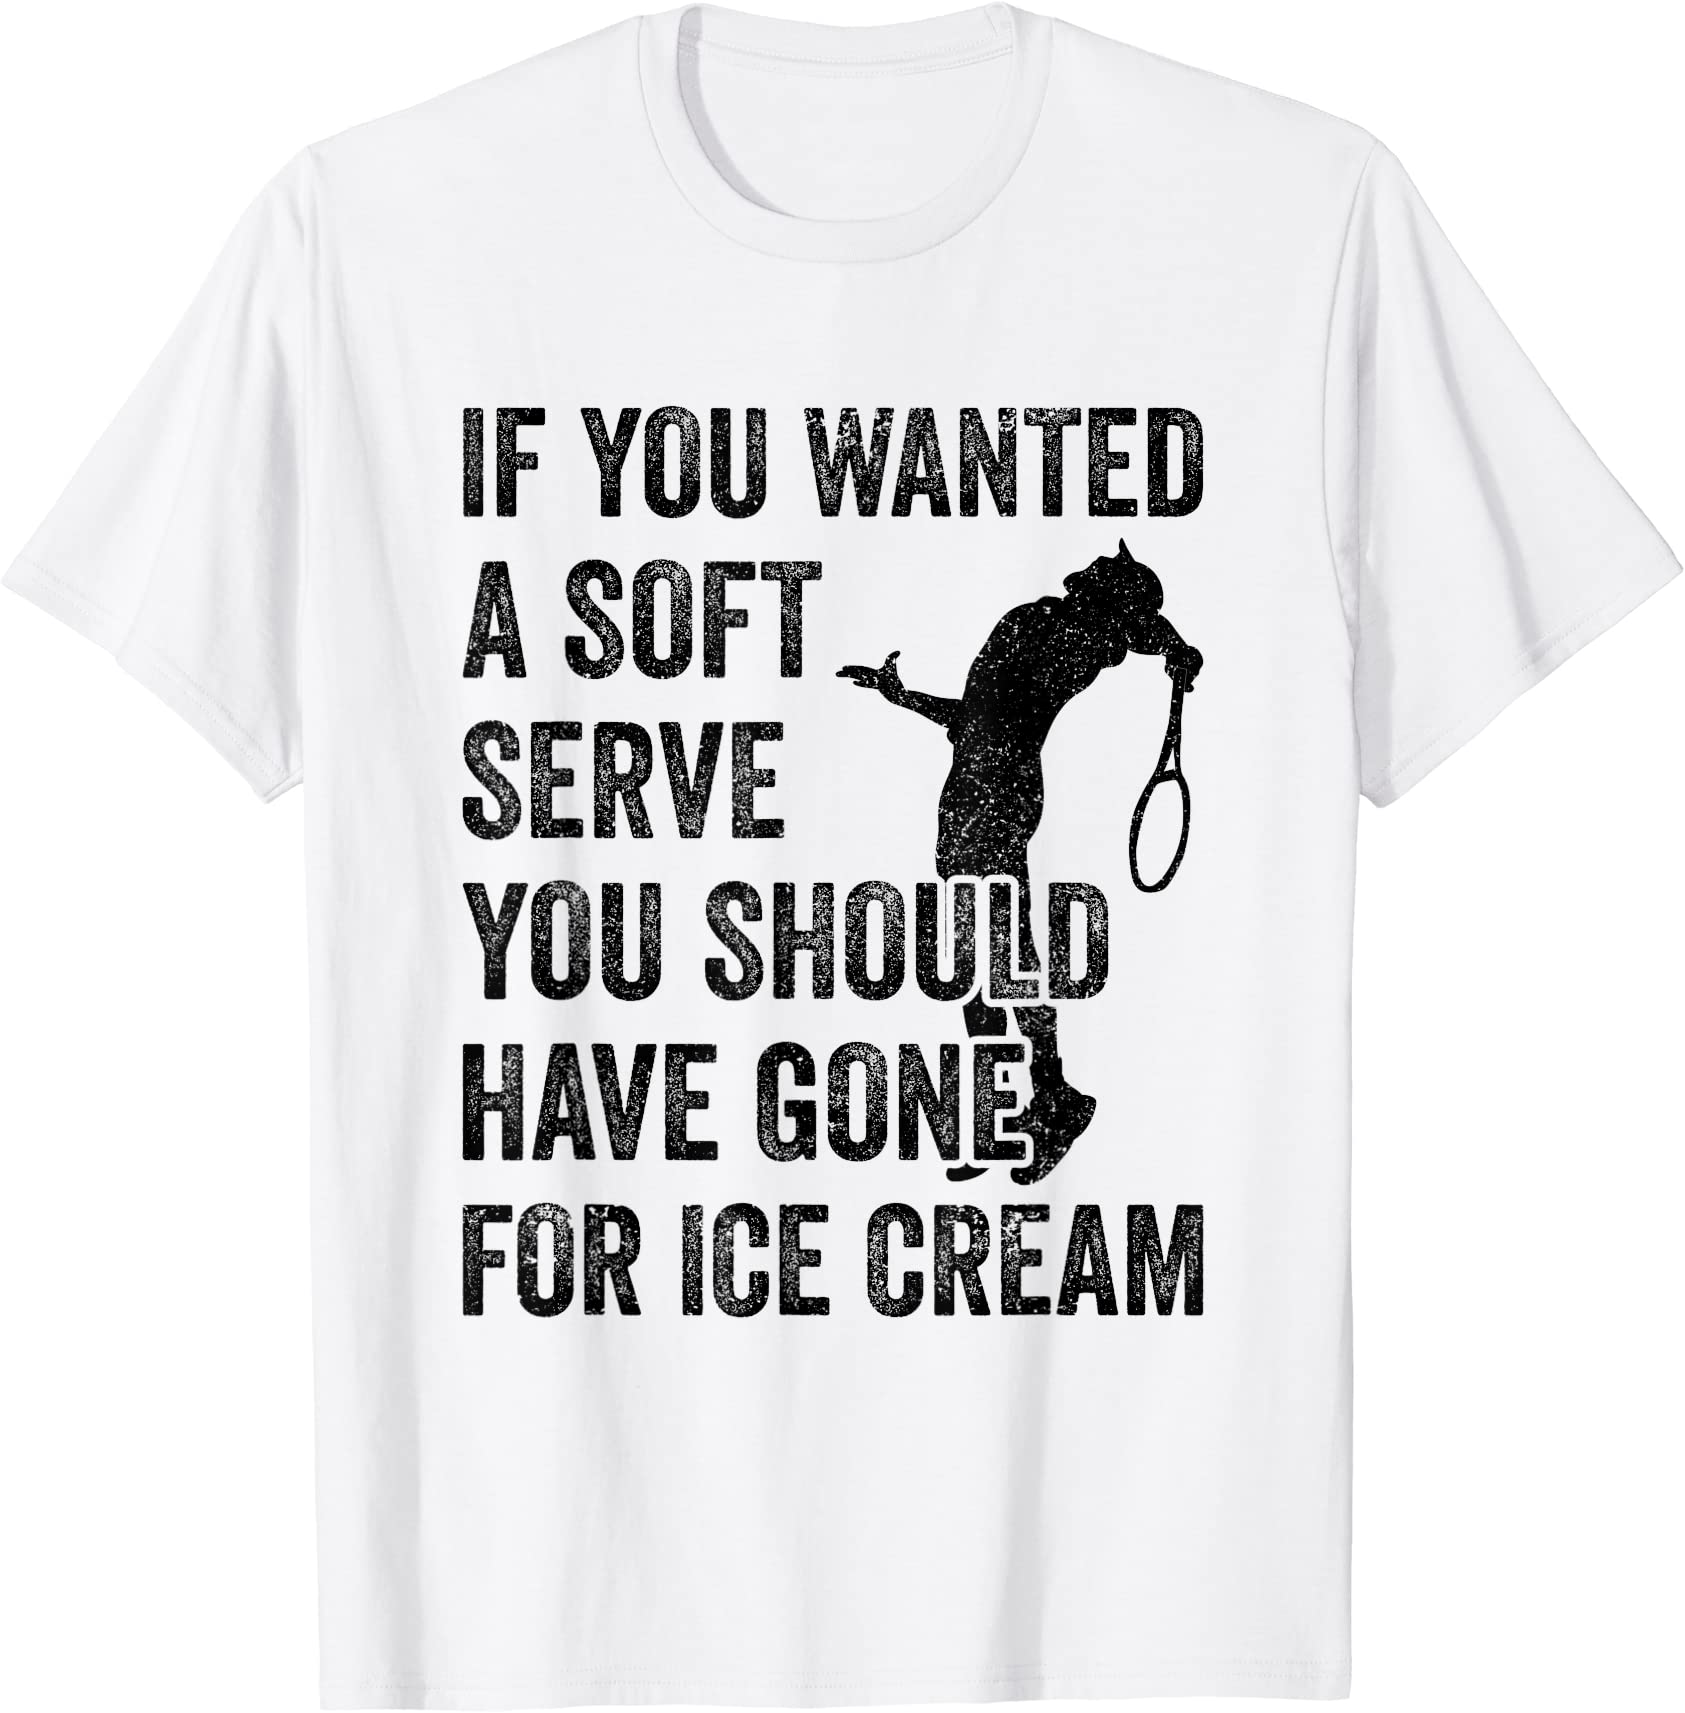 tennis if you want a soft serve go get ice cream t shirt men - Buy t ...